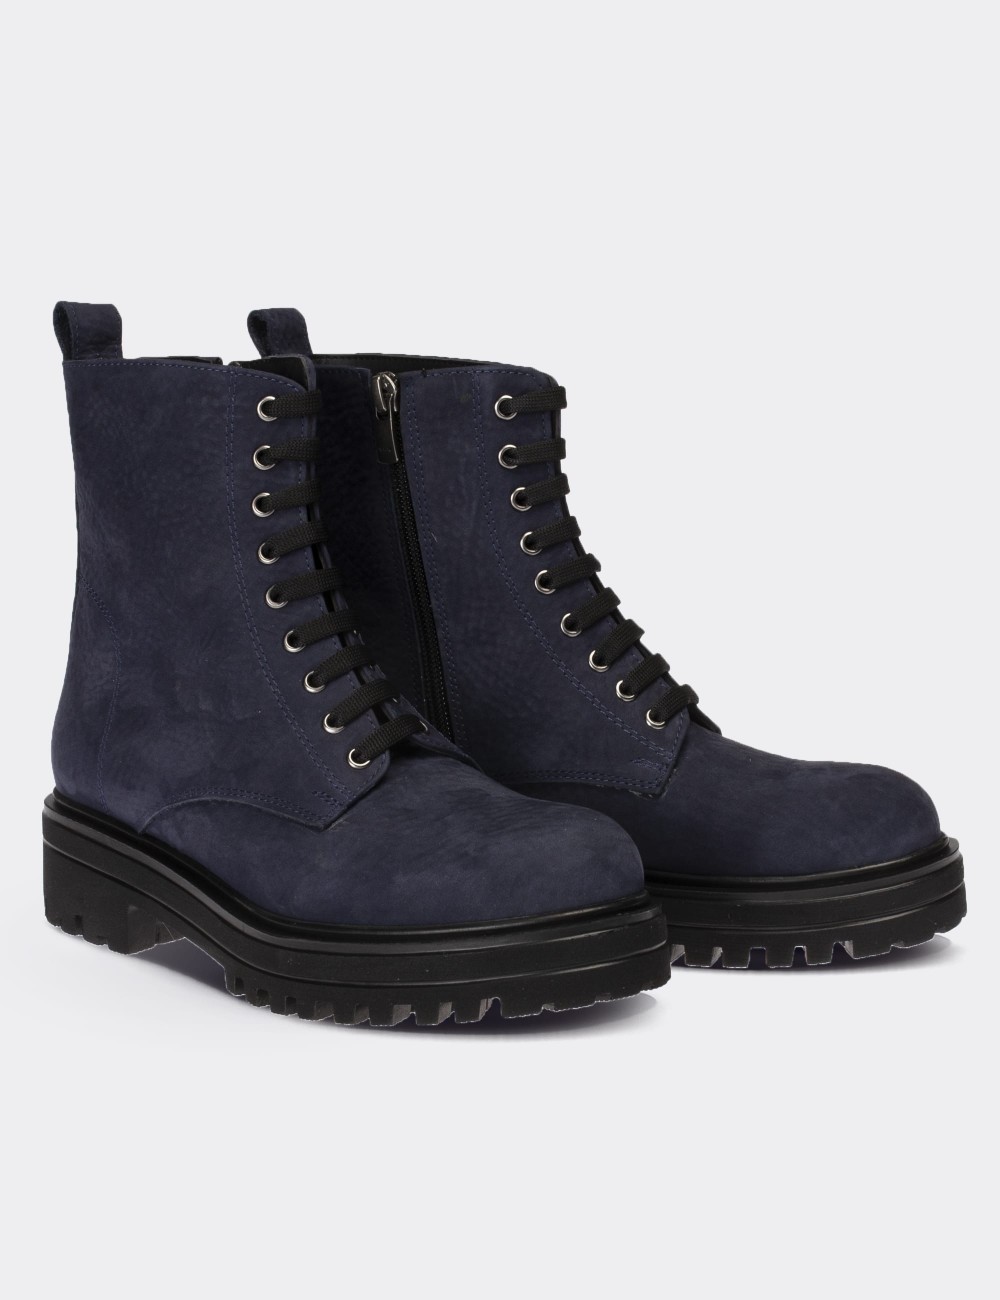 Blue  Leather Postal Boots - 01814ZMVIE14